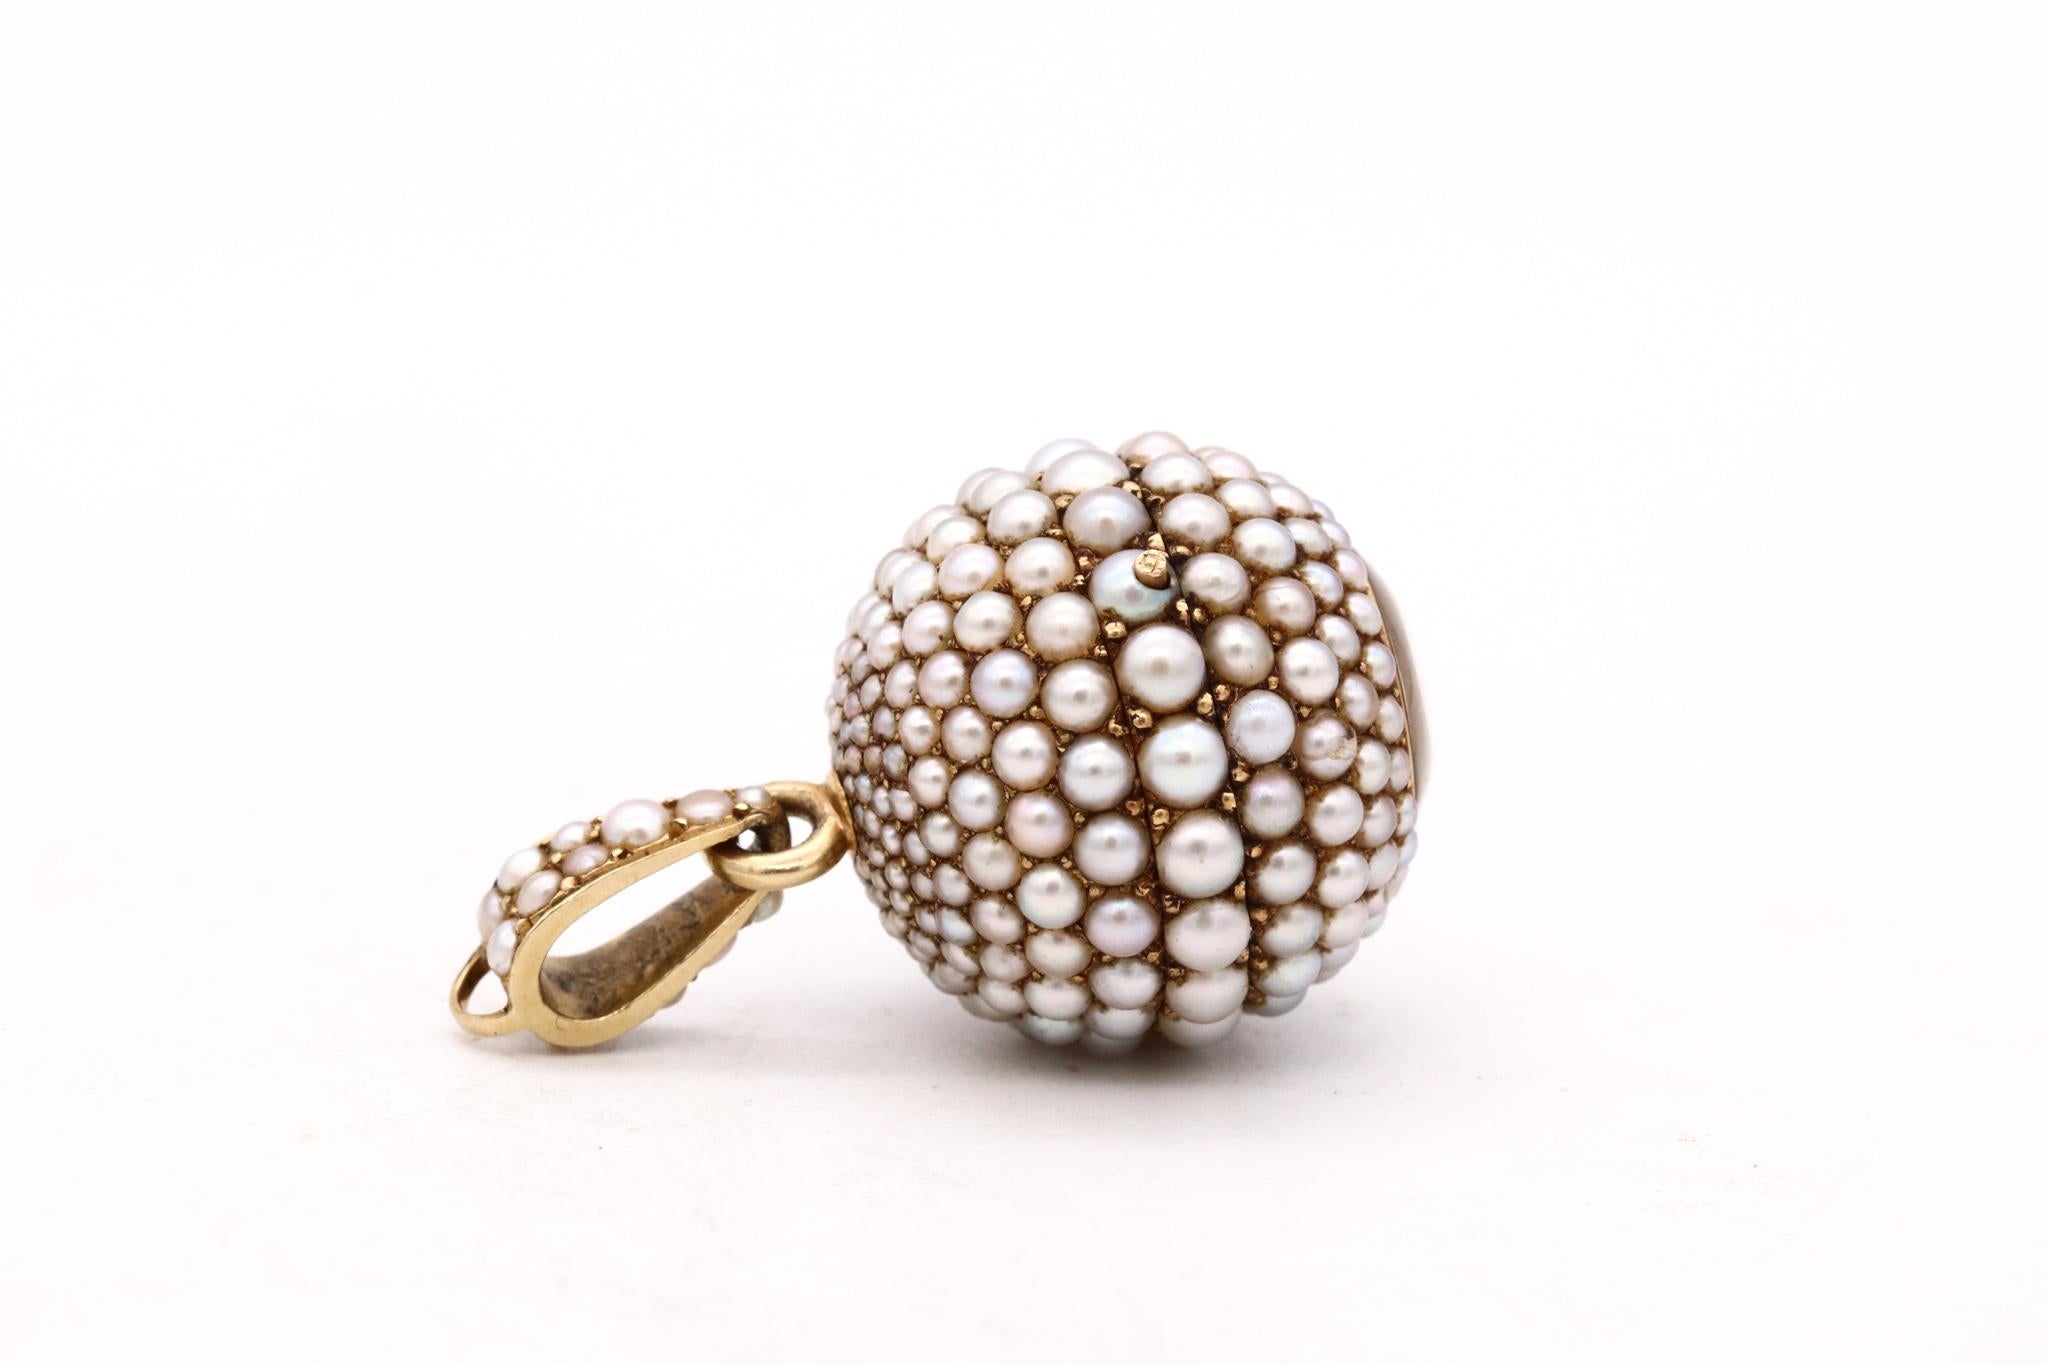 Art Deco 1930 European Spherical Watch Pendant In 18Kt Gold With Gradated Pearls 1